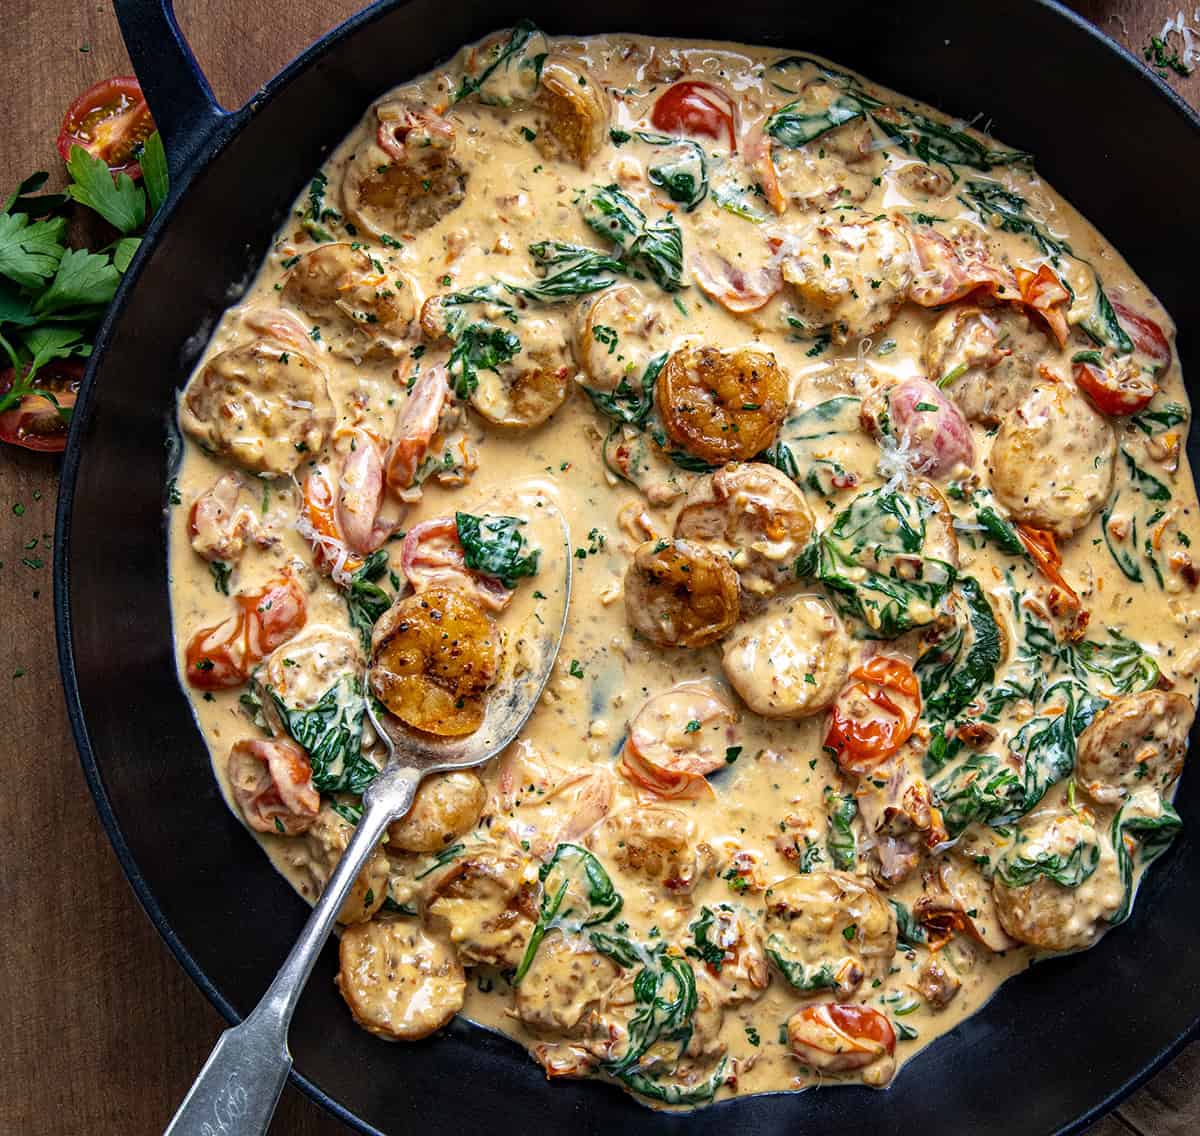 Pan of Creamy Tuscan Shrimp on a wooden table with a spoon from overhead.